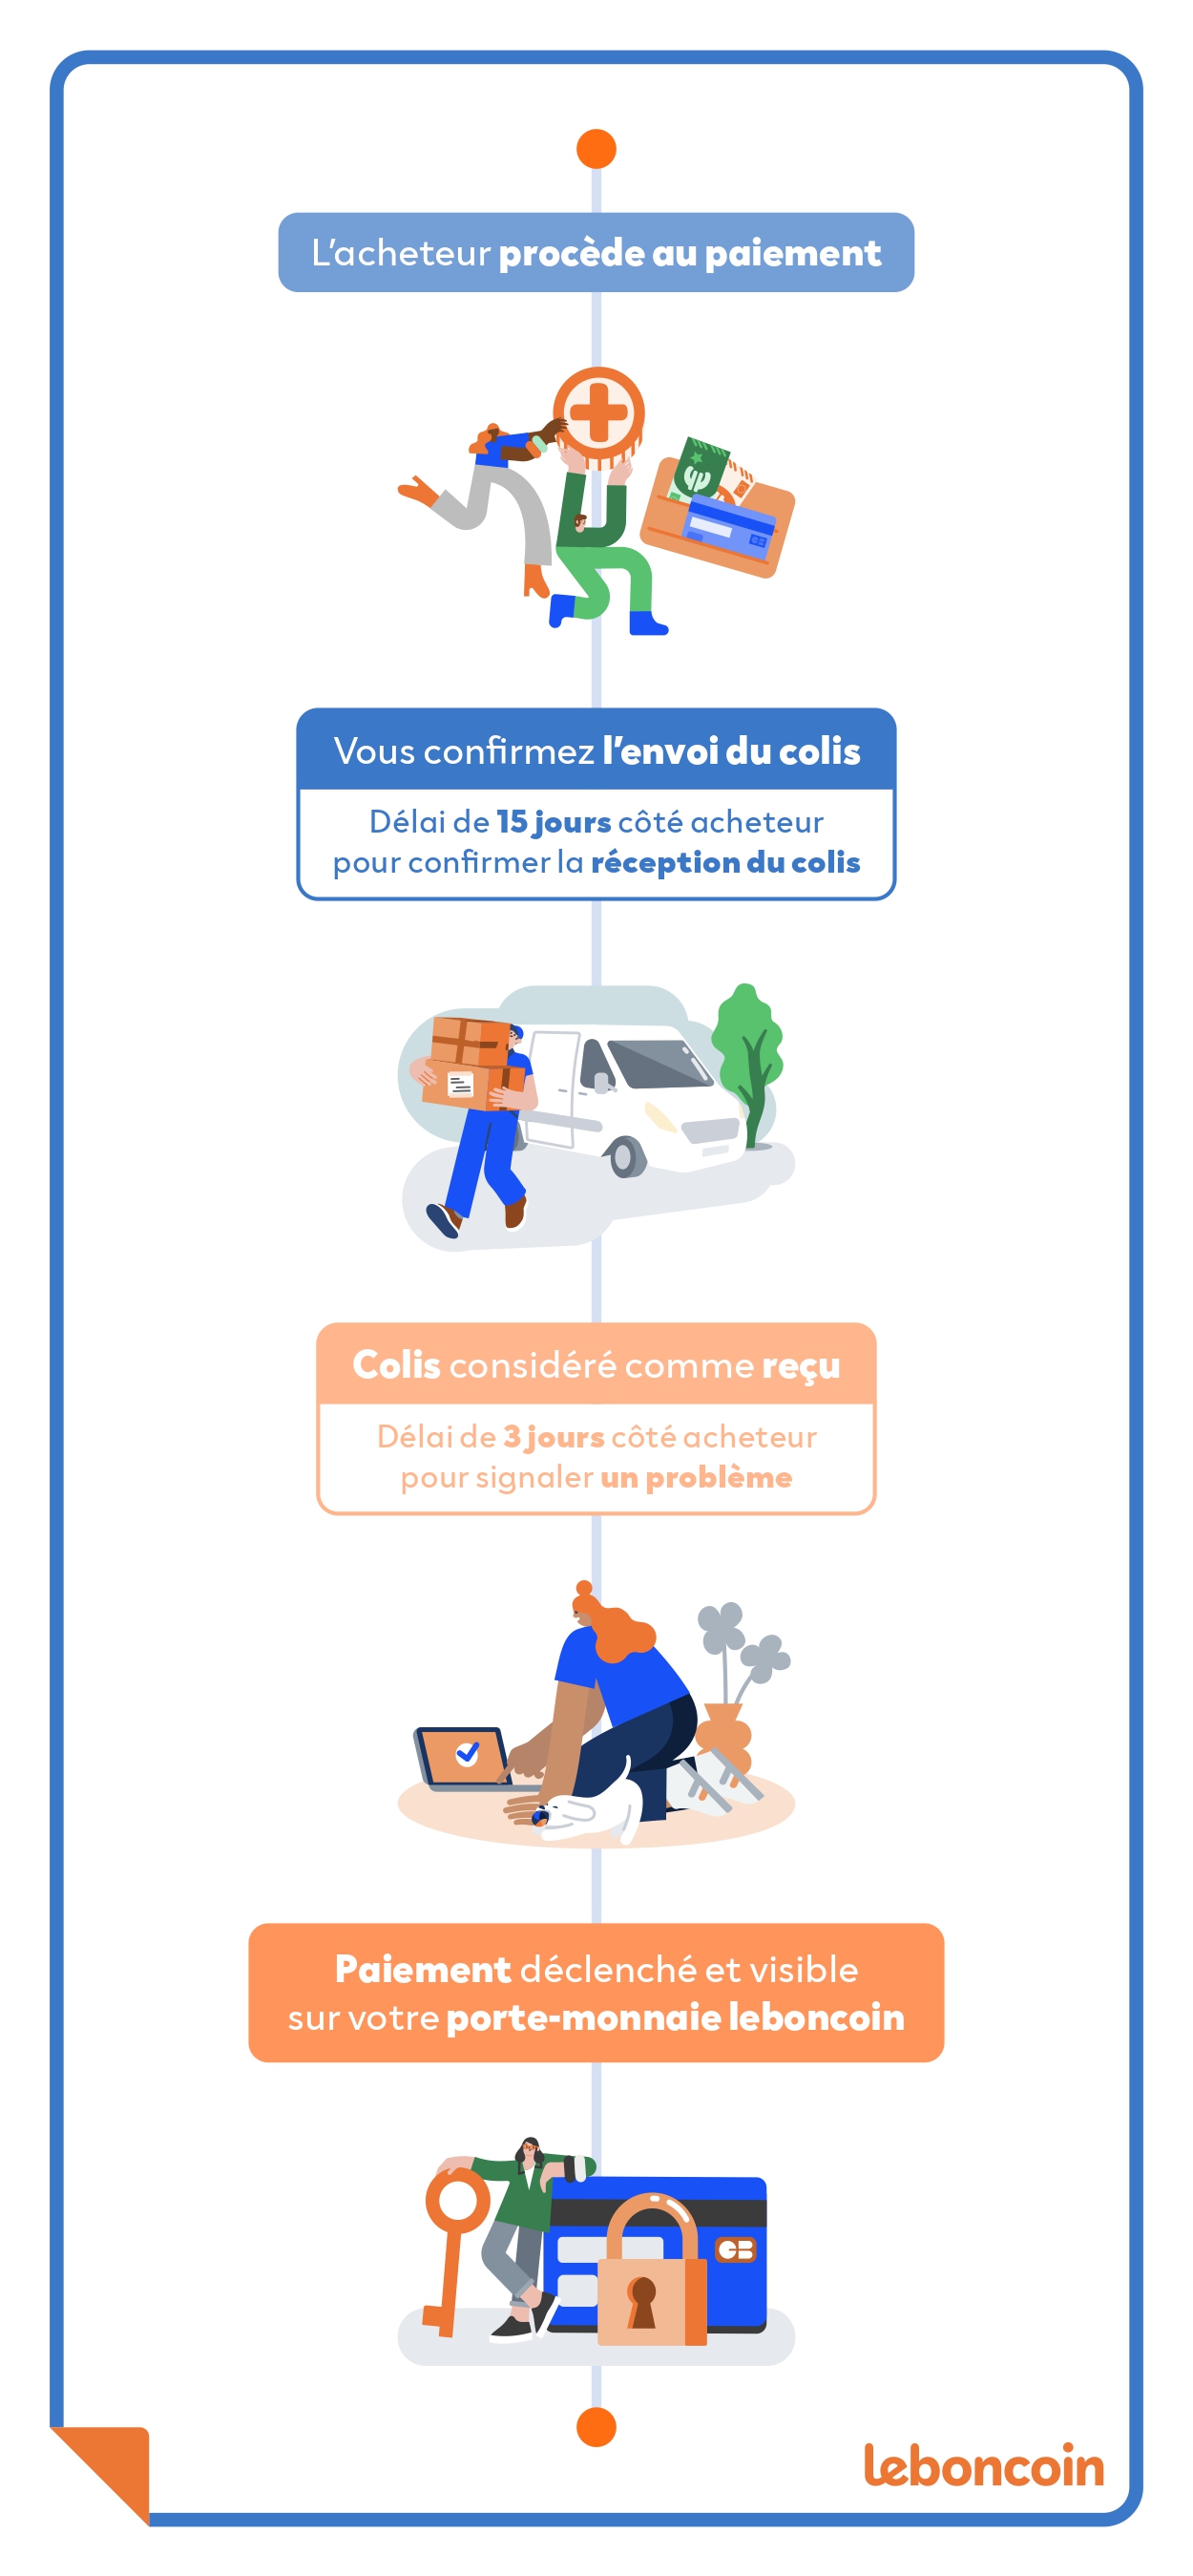 Infographie_paiement_finale_page-0001.jpg